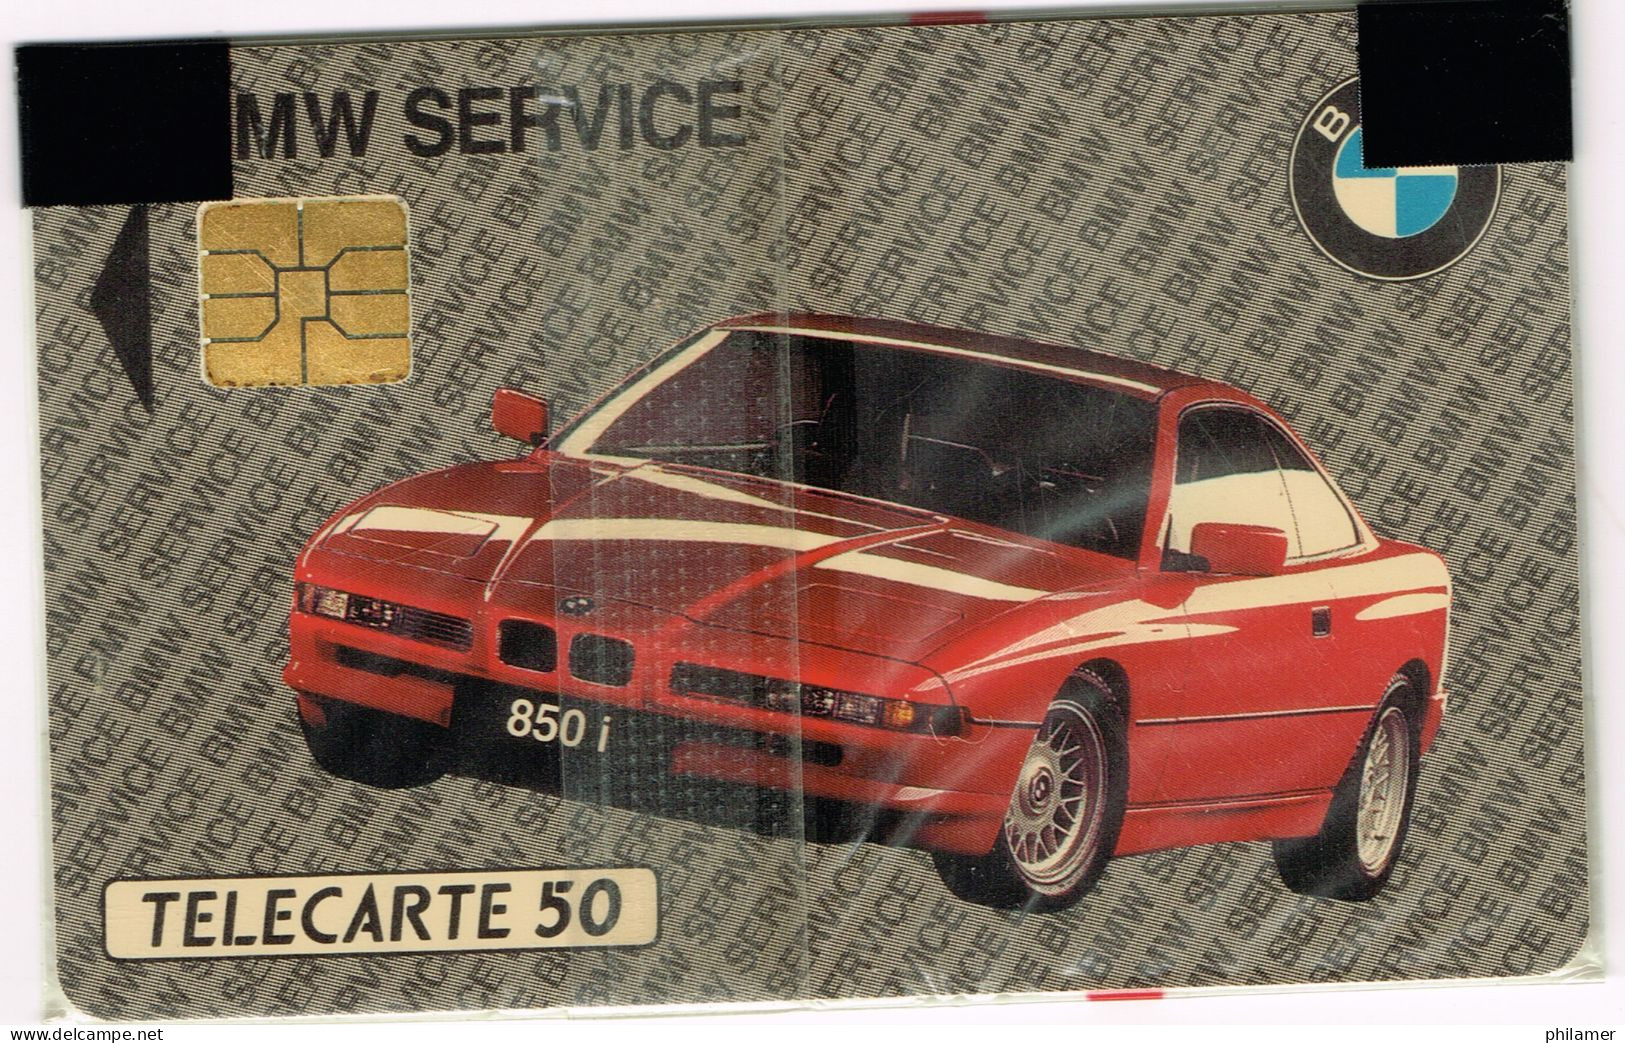 France French Telecarte Phonecard PRIVEE EN207 BMW SERVICE 850L MERCEDES BENTZ AUTO VOITURE NSB BE - Phonecards: Private Use